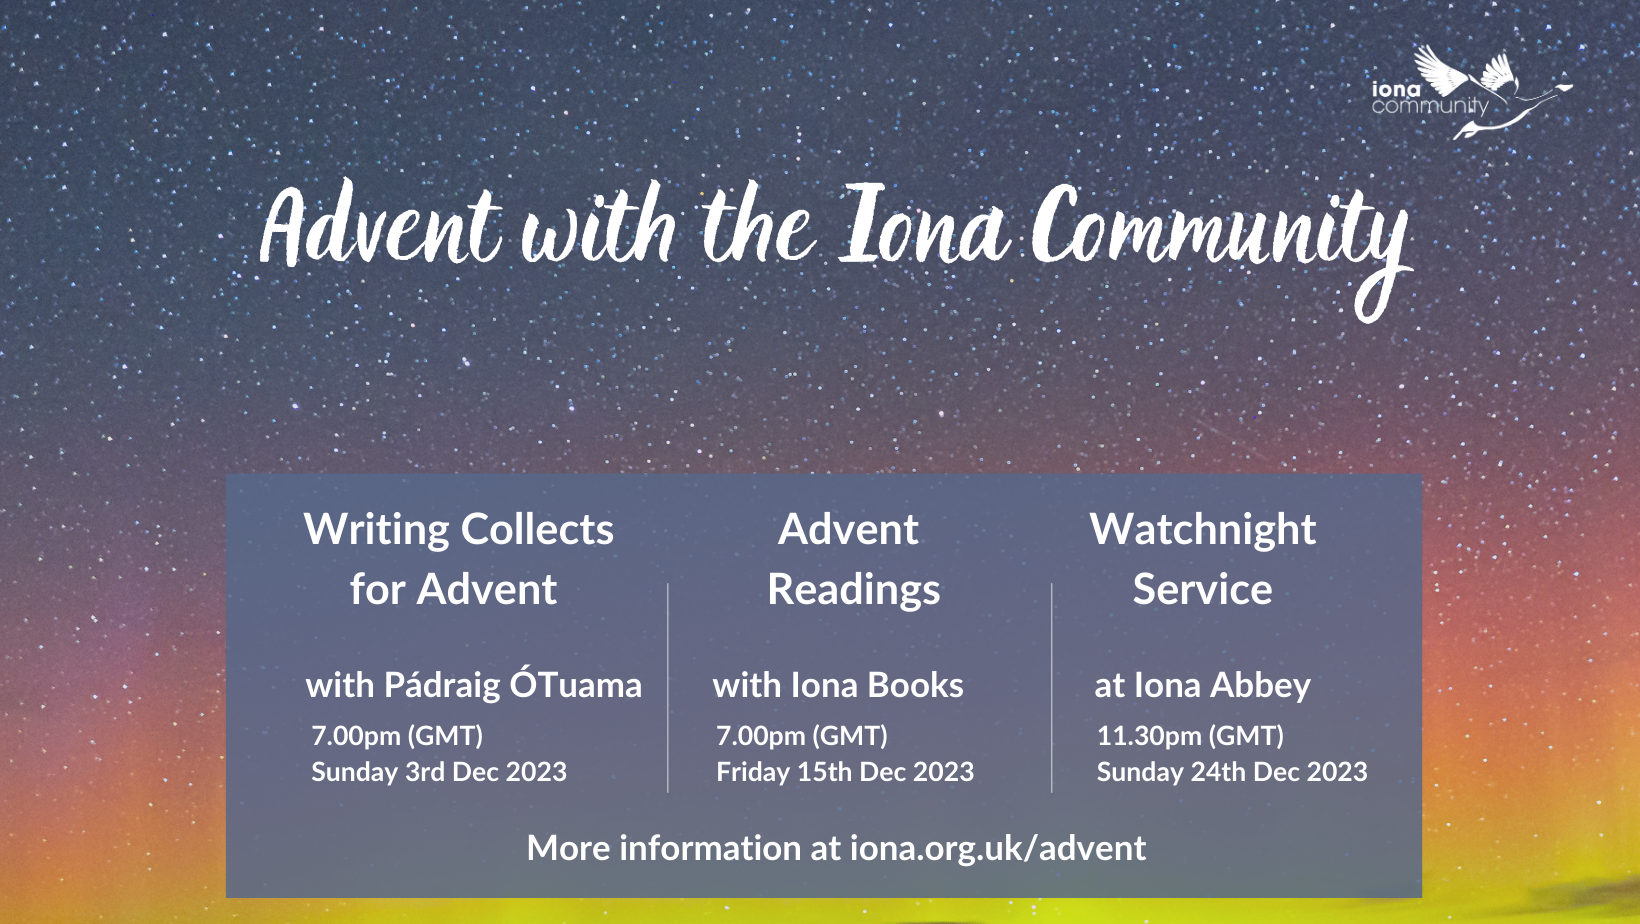 Join the Iona Community, Wild Goose Publications, Wild Goose Resource Group and Iona Abbey as we make our way through the season of Advent with online and onsite events.